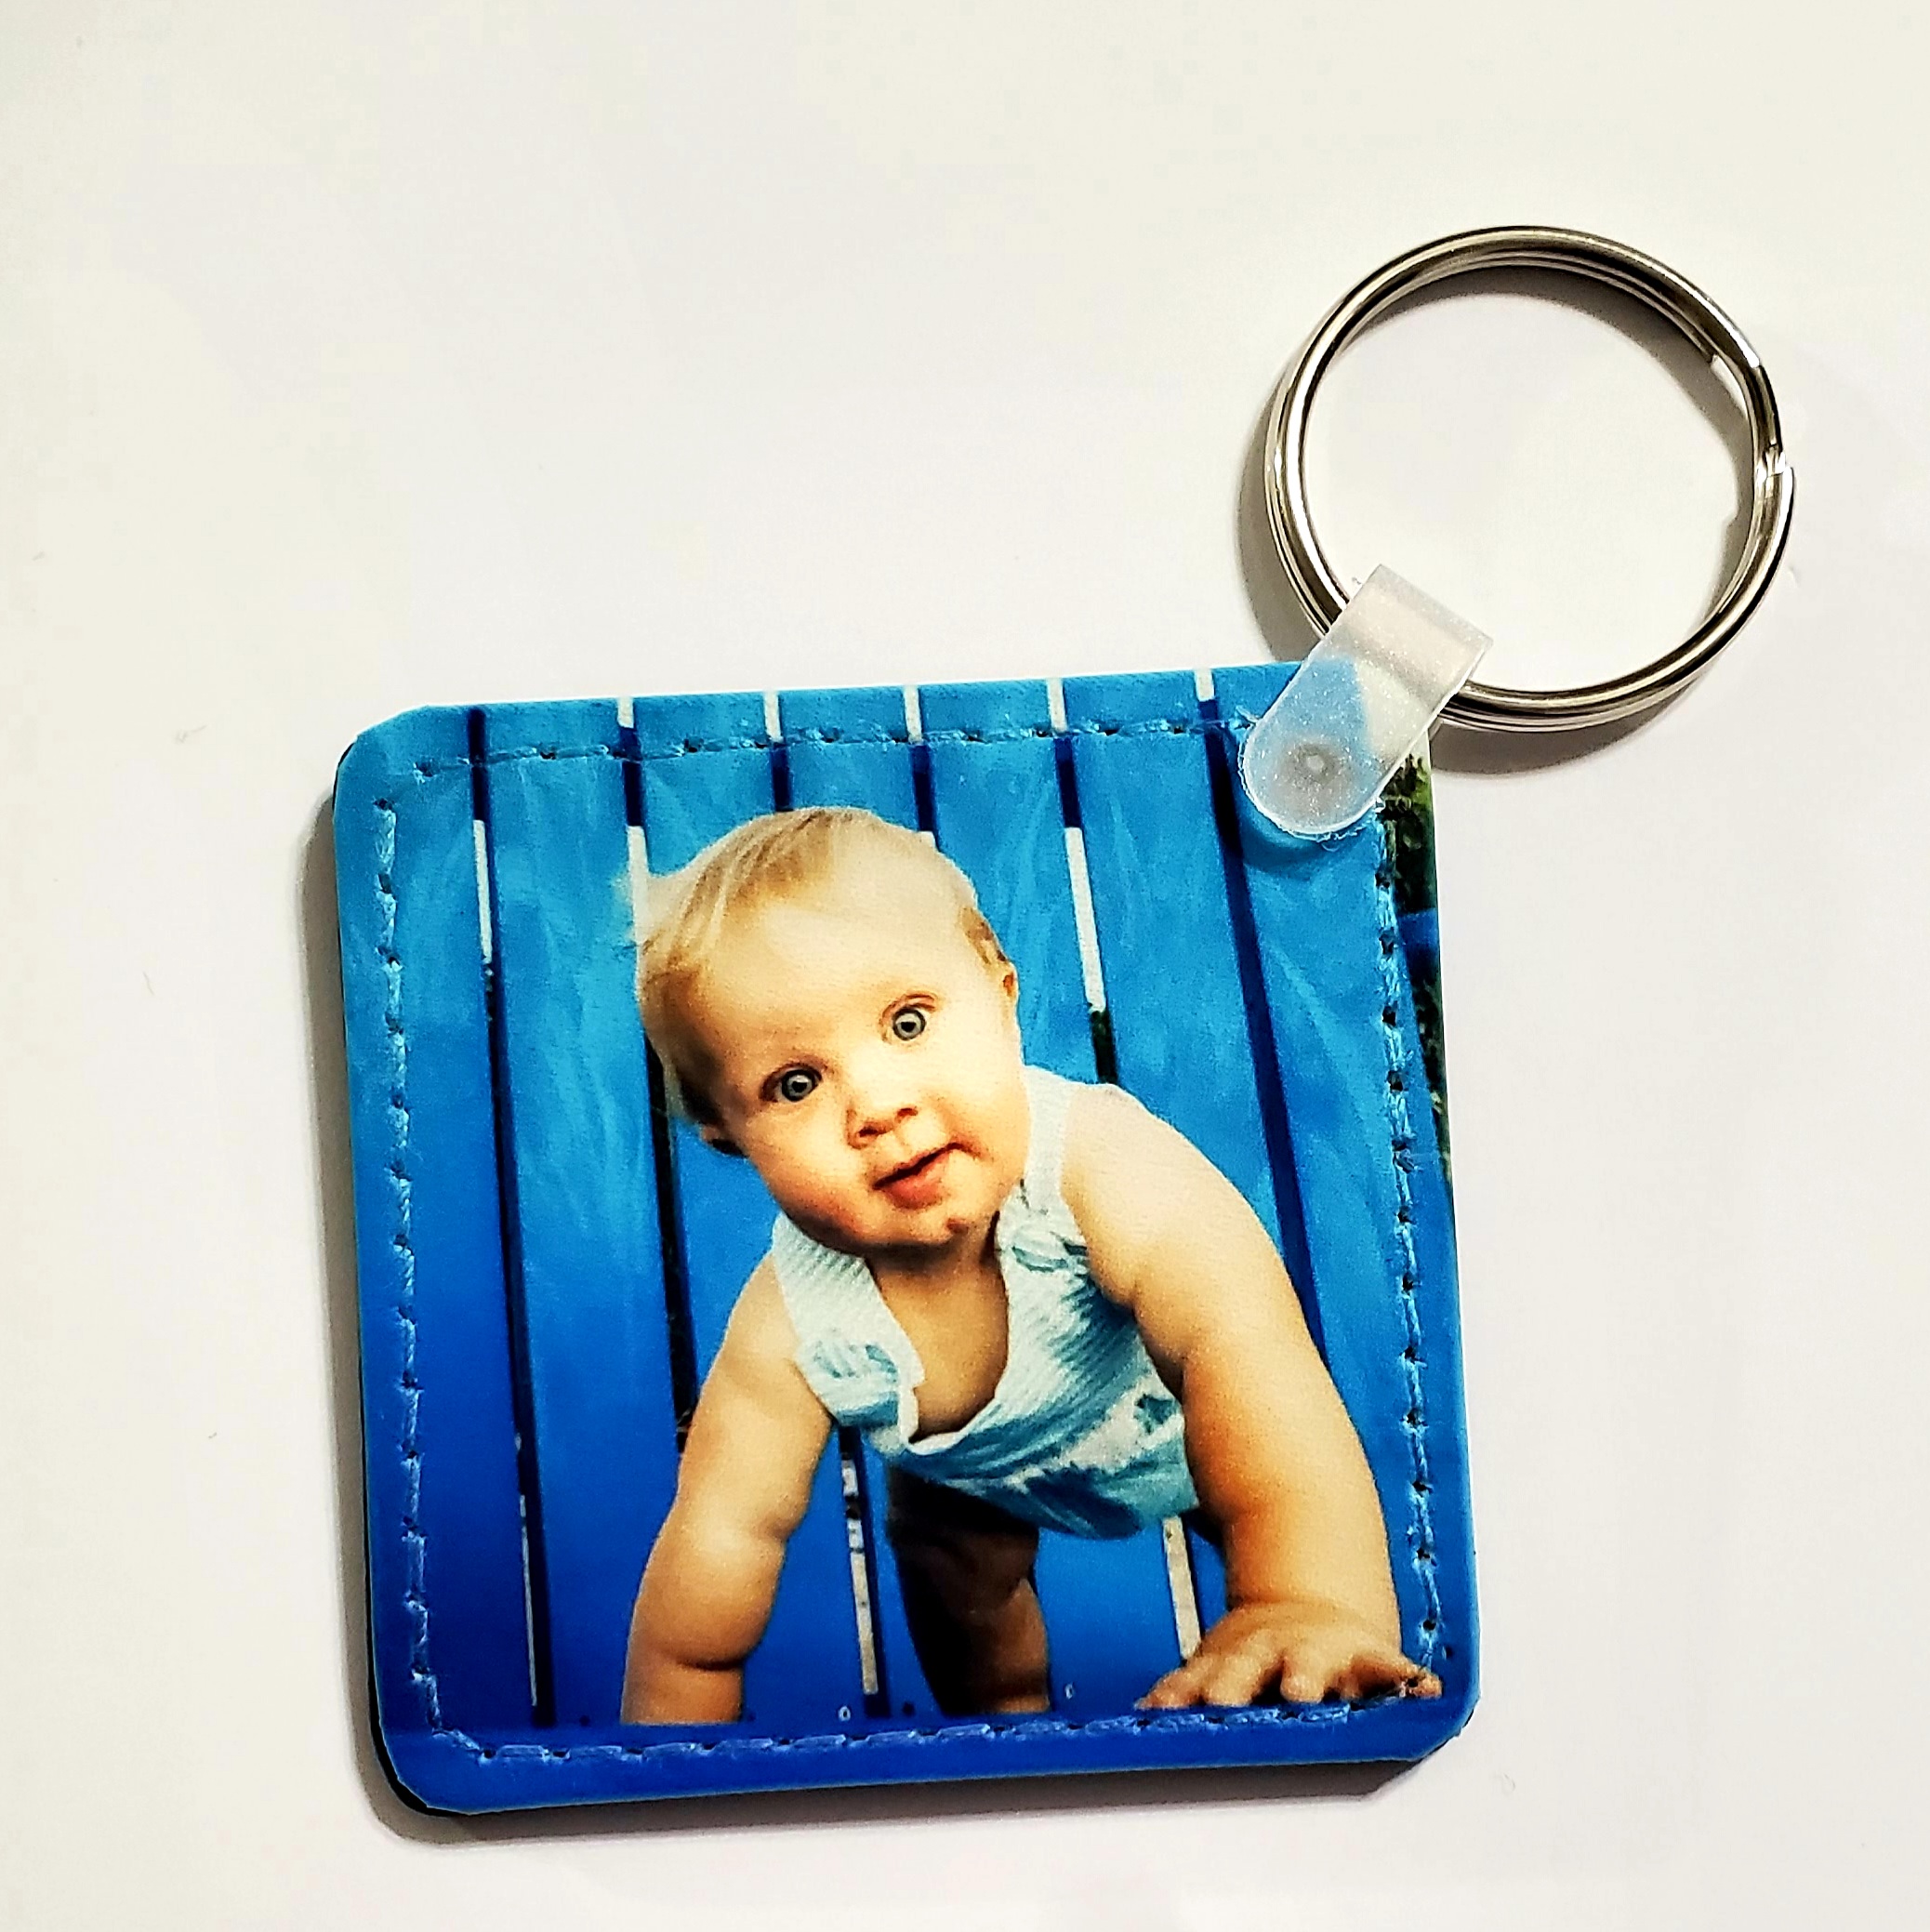 Leather Key Chain made with sublimation printing